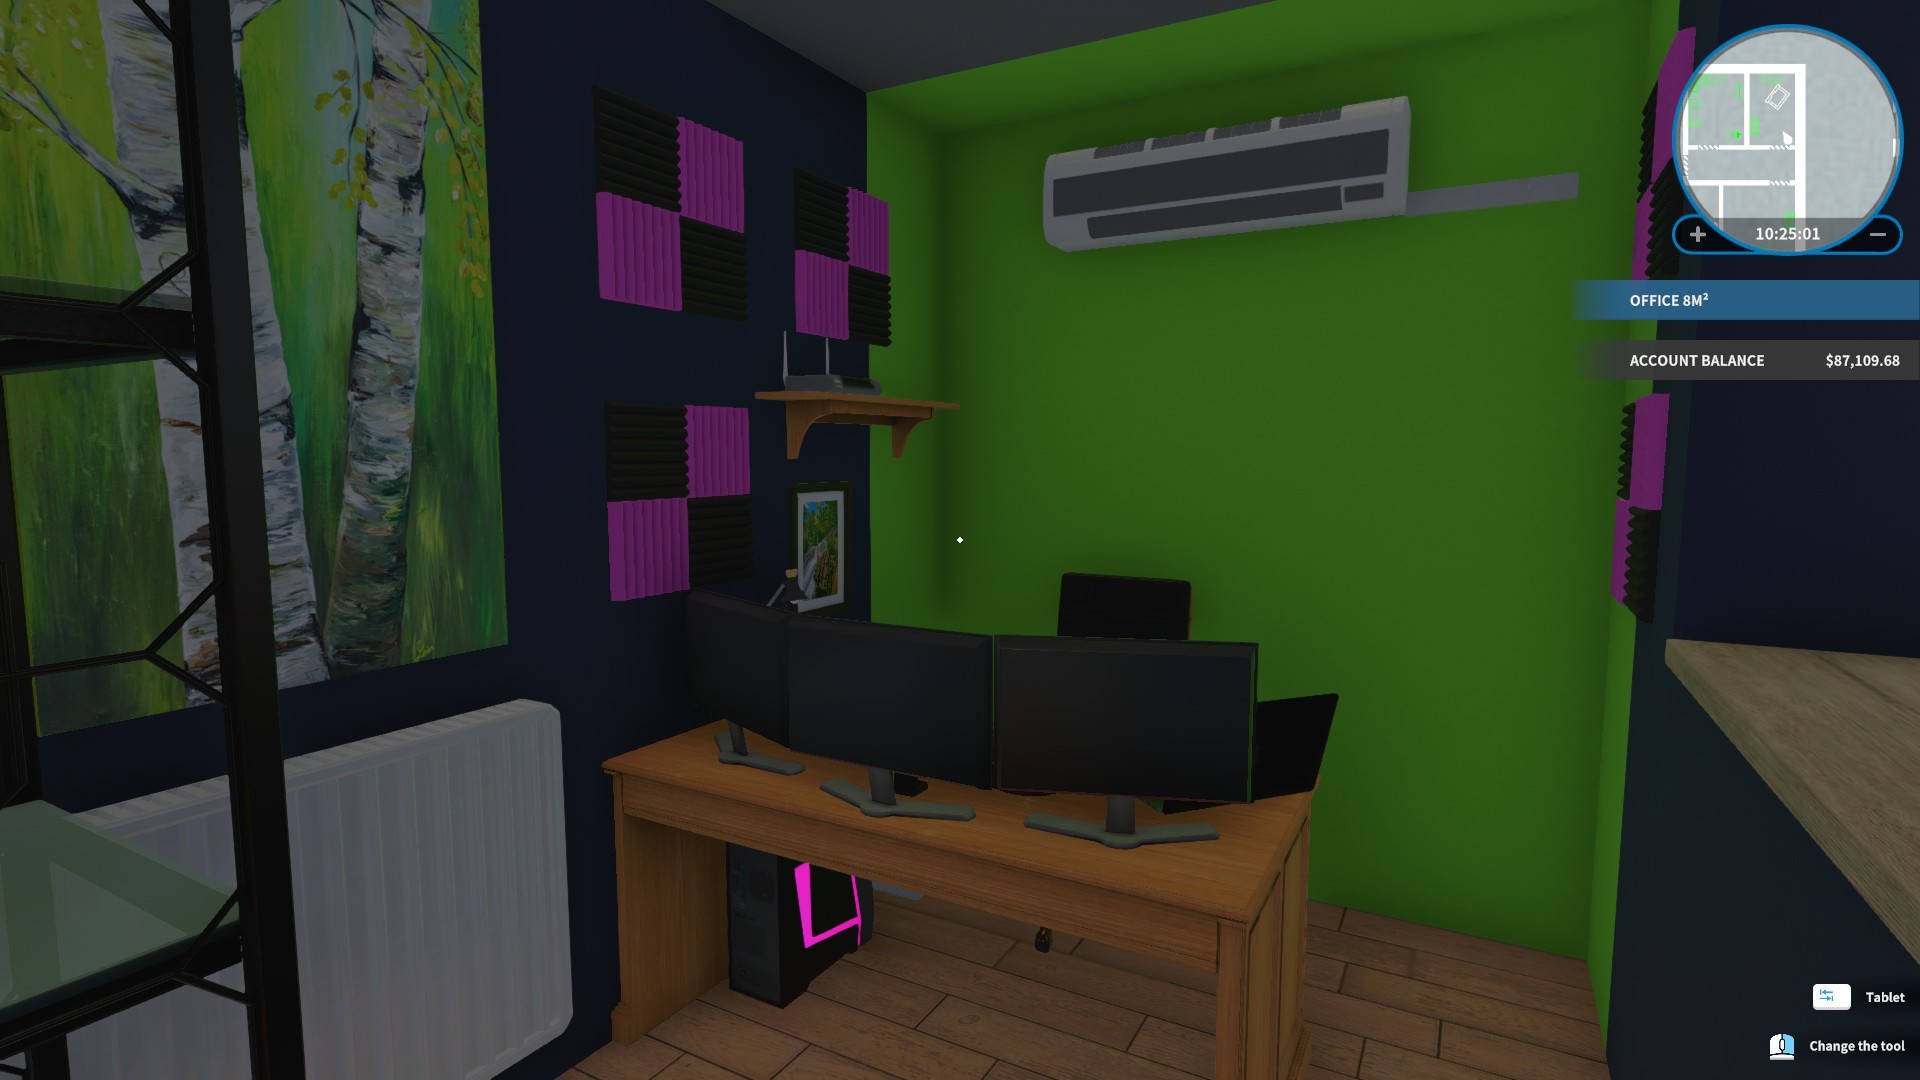 House Flipper Rooms Guide - Nice Office Room with a Great Computer Setup